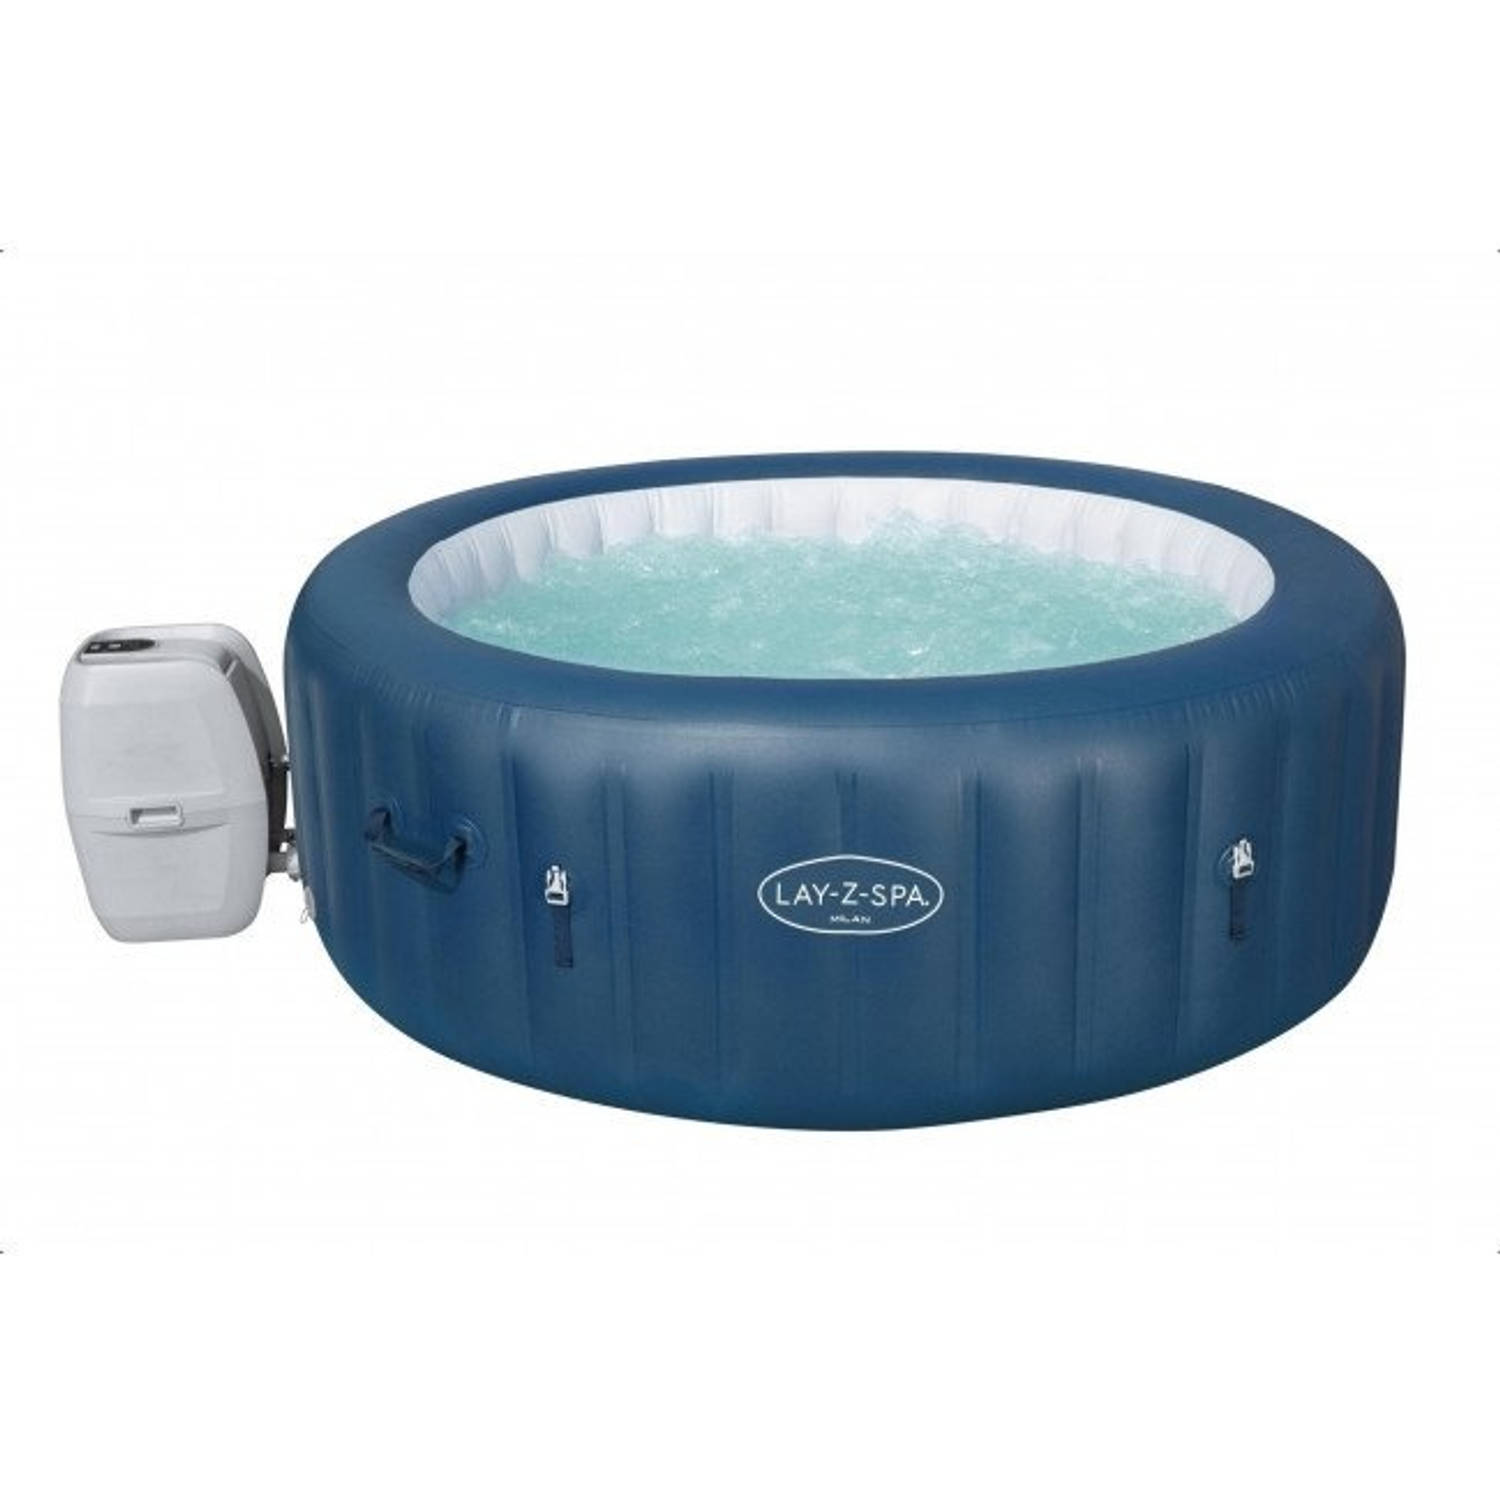 Lay-z-spa Milan Plus Max 6 Pers 140 Airjets Jacuzzi Bubbelbad- Whirlpool Copy